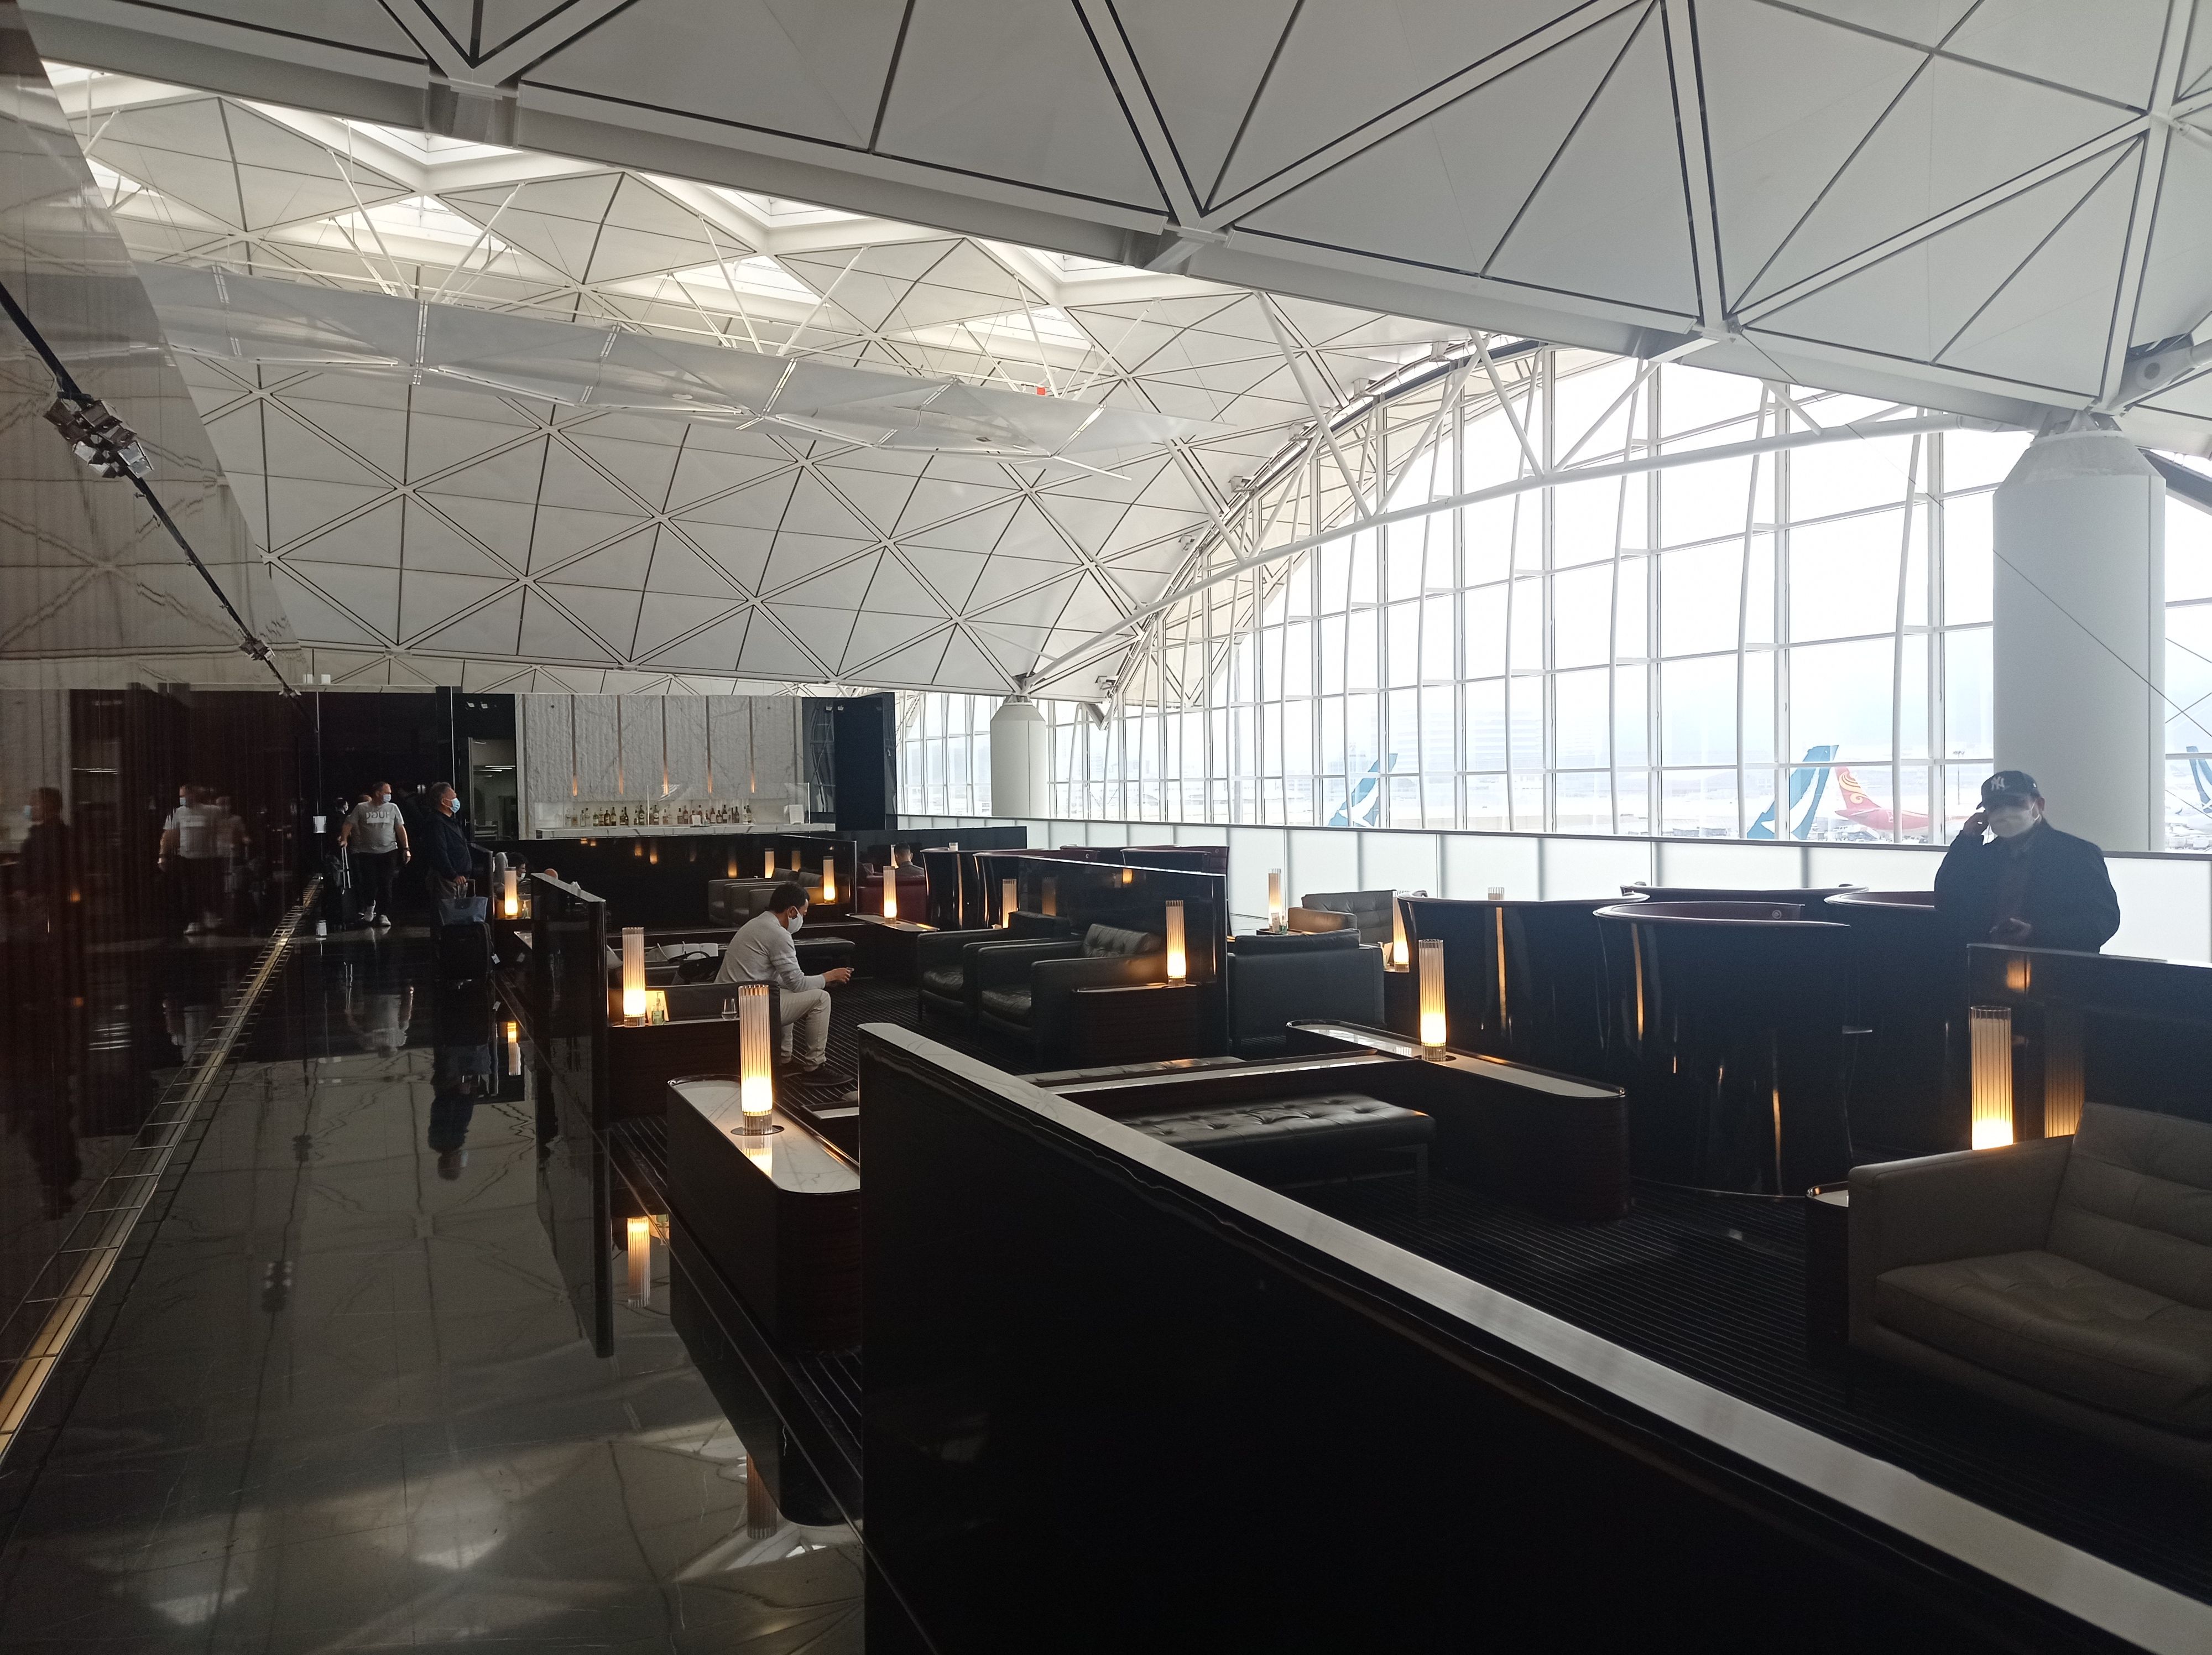 Inside the Cathay Pacific business lounge.